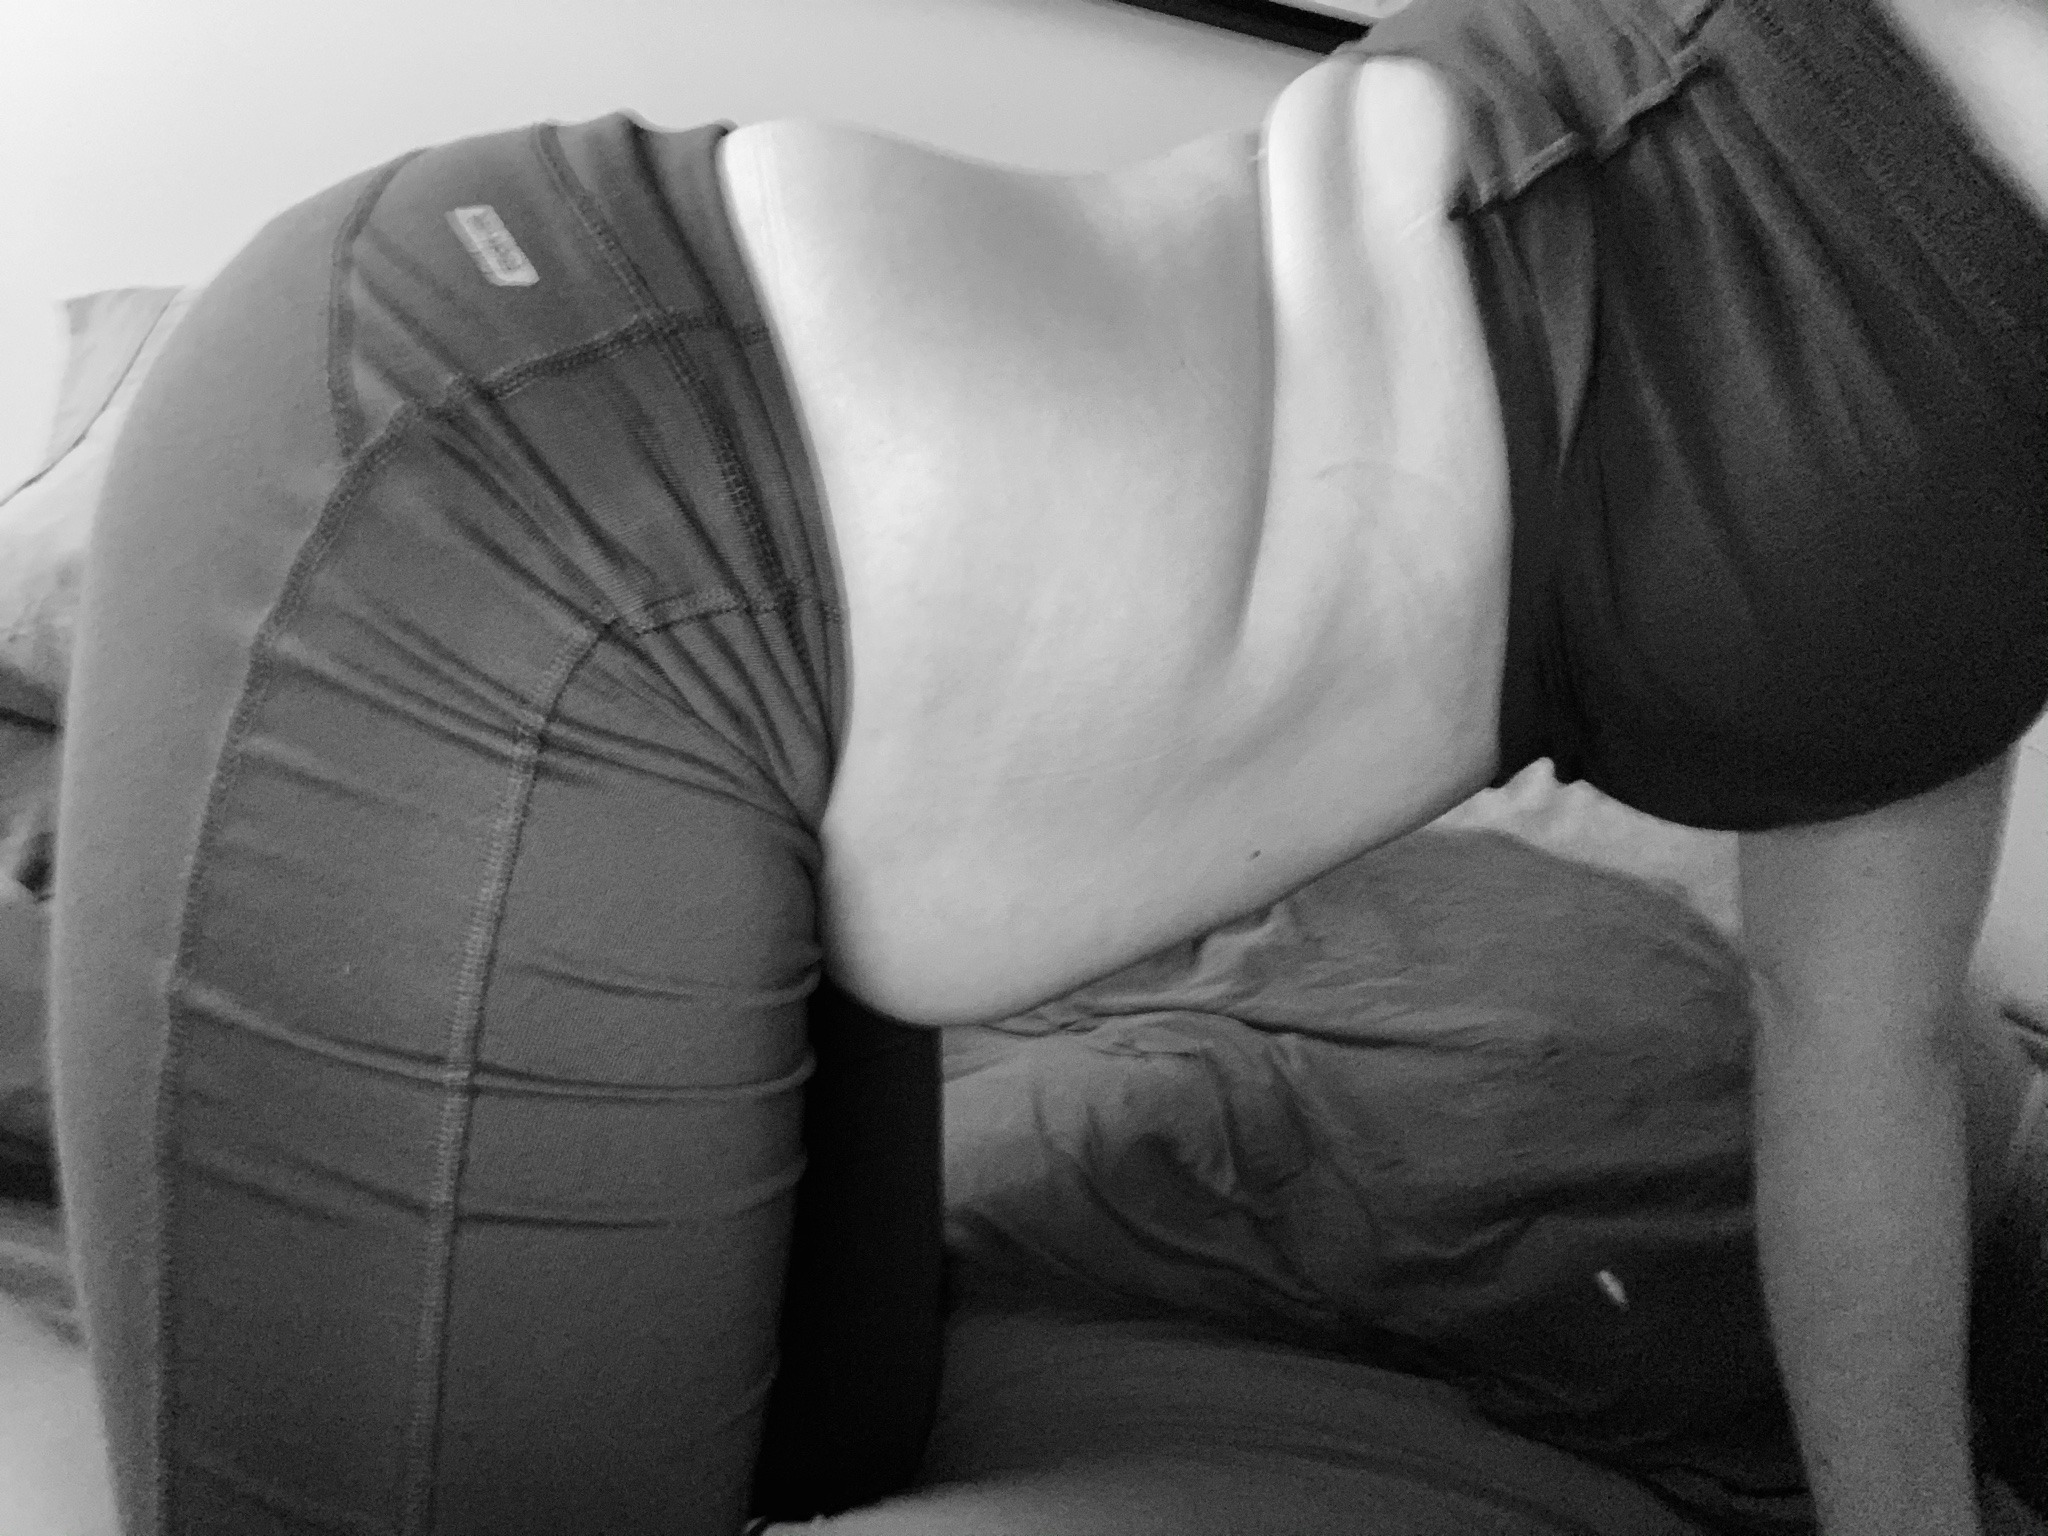 growingbellybabe-deactivated202:Hanging belly comparison December January 20thToday